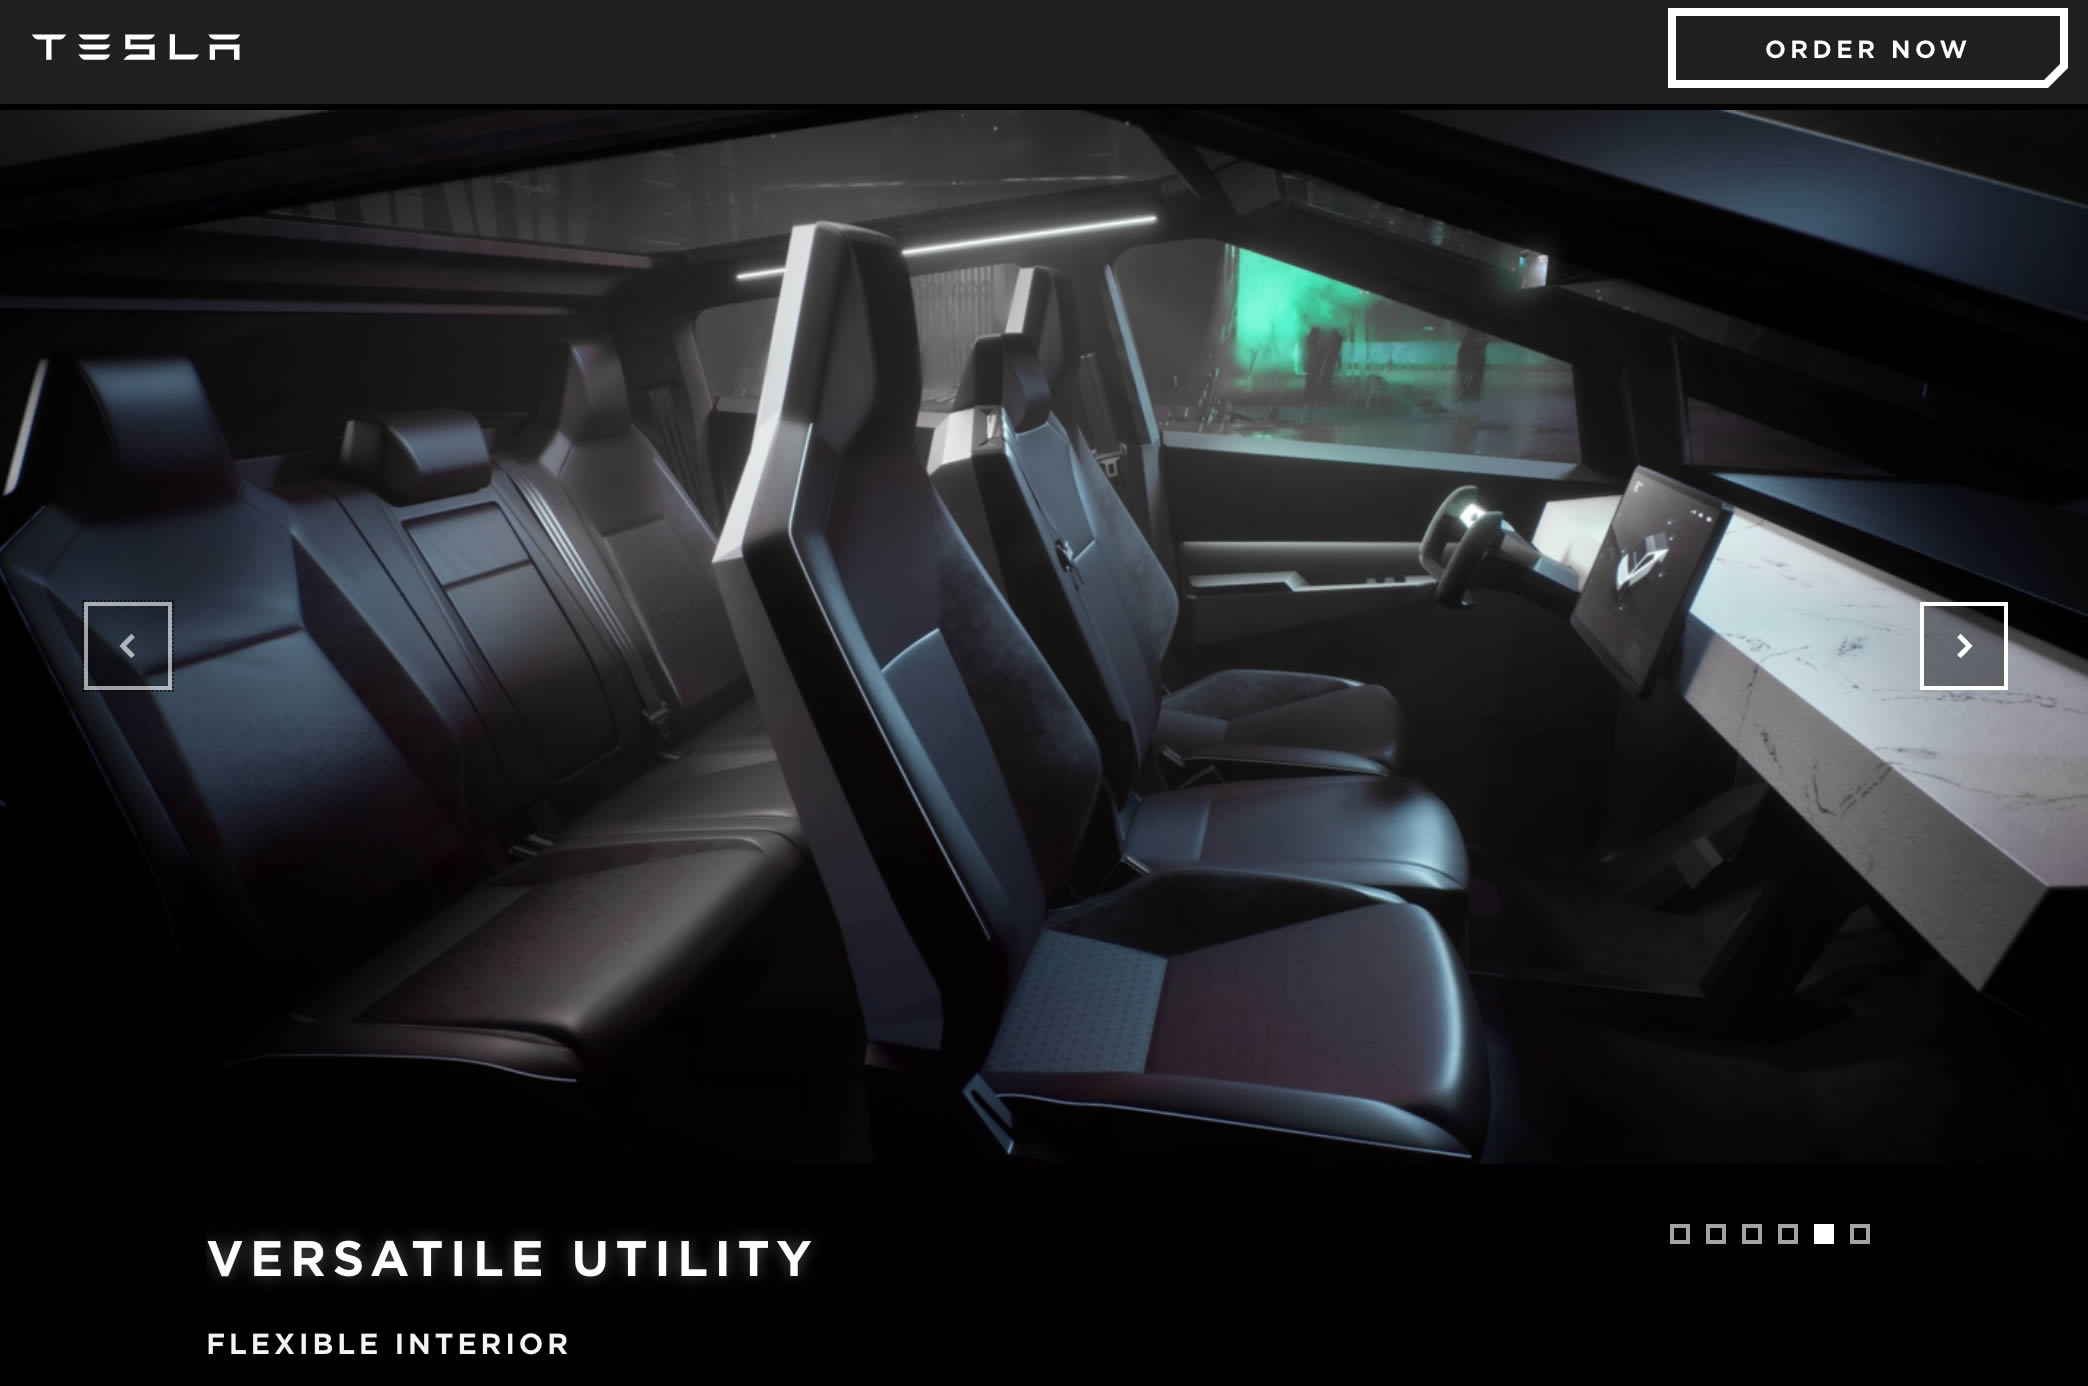 Tesla Cybertruck Unveil: What we Can Expect from It - Interior